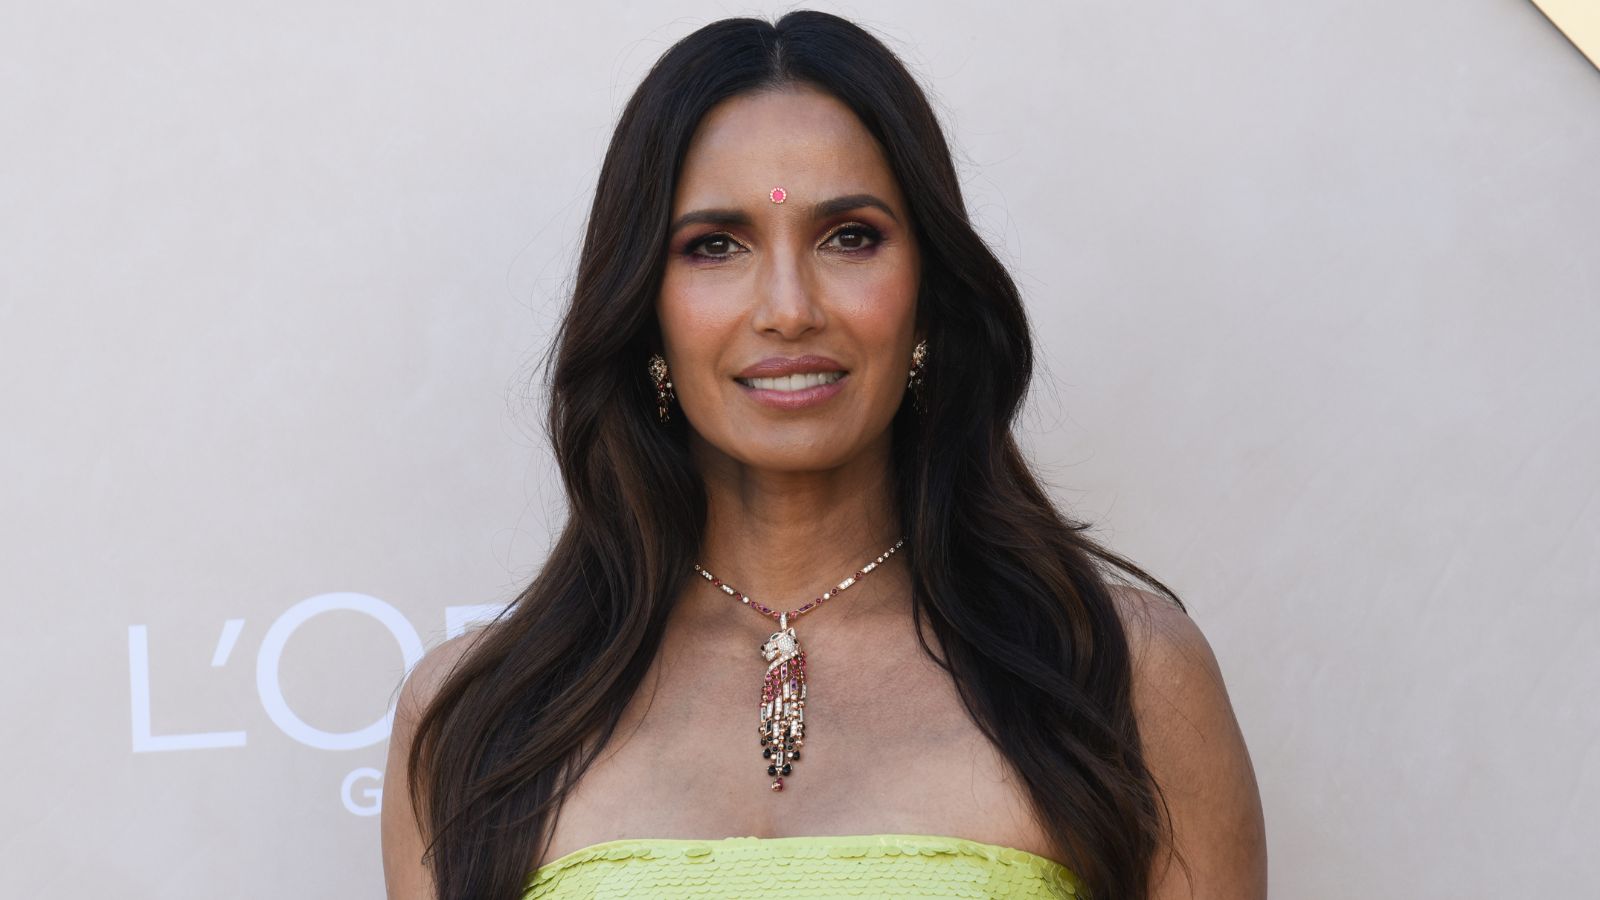 Padma Lakshmi's open shelves act as a two-in-one storage and decor solution – and they're painted this bold hue